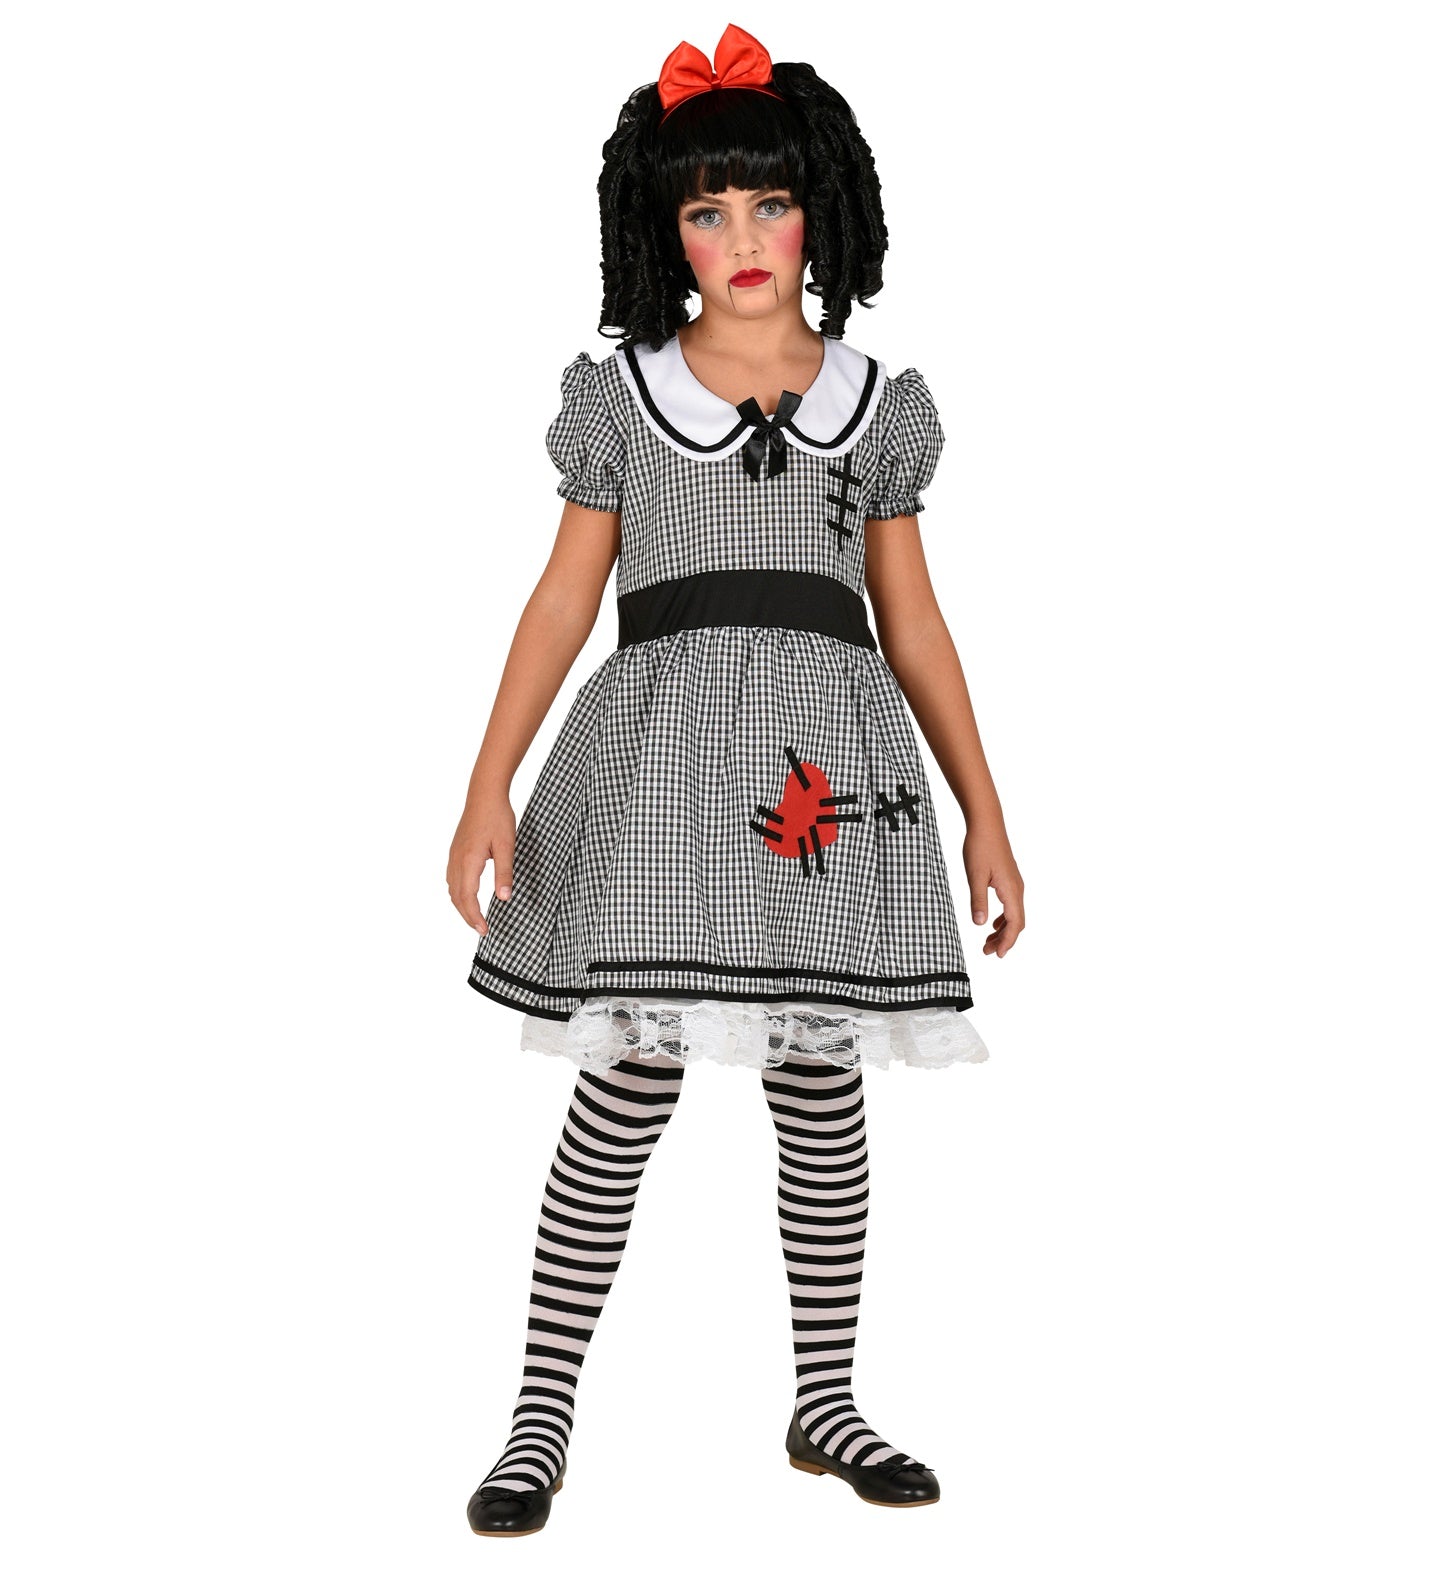 Creepy Doll Girl's outfit